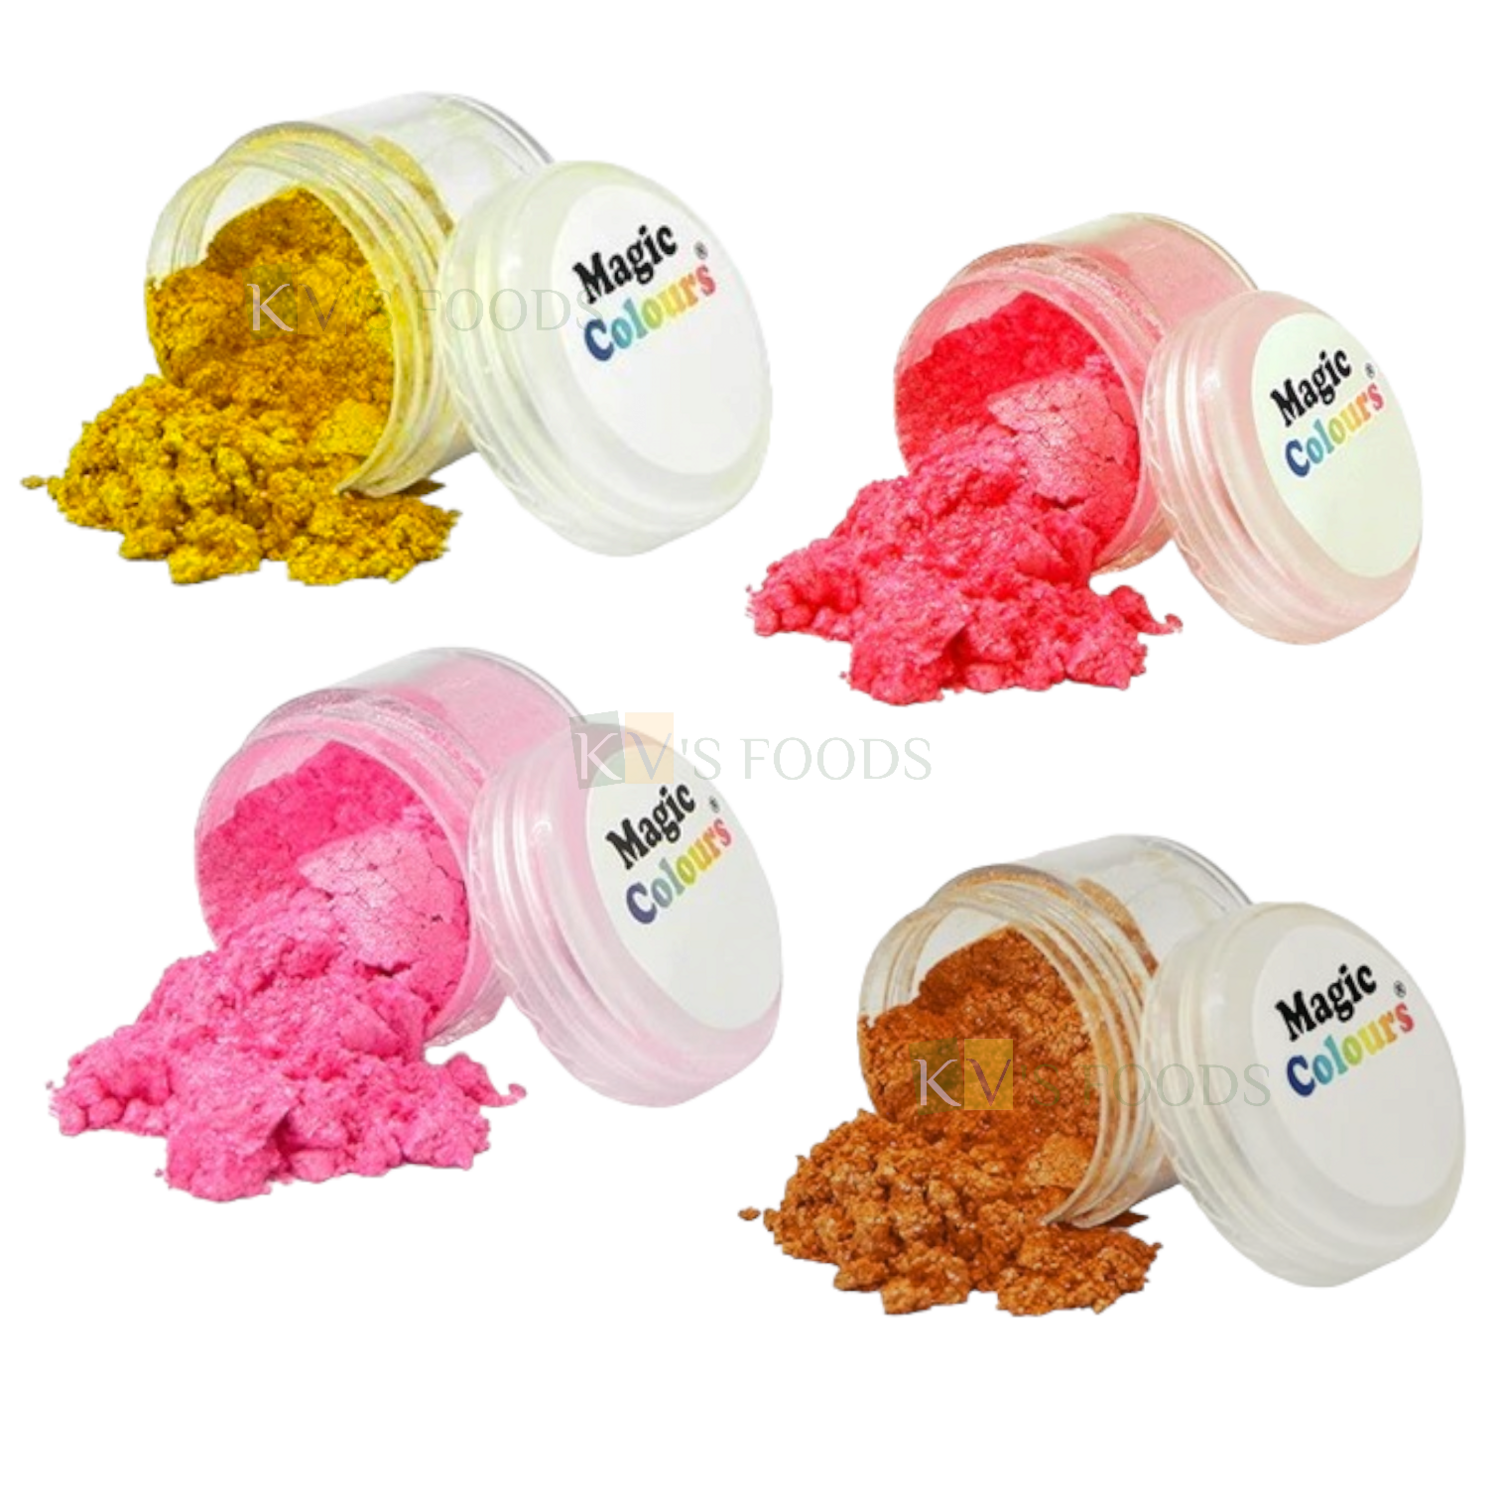 1 PC Edible Magic Colours Lustre Dust (10 ML), Used for Fondant, Chocolate, Marzipan, Almond Dragees, Icing, Sprinkles, Powder Based Colours